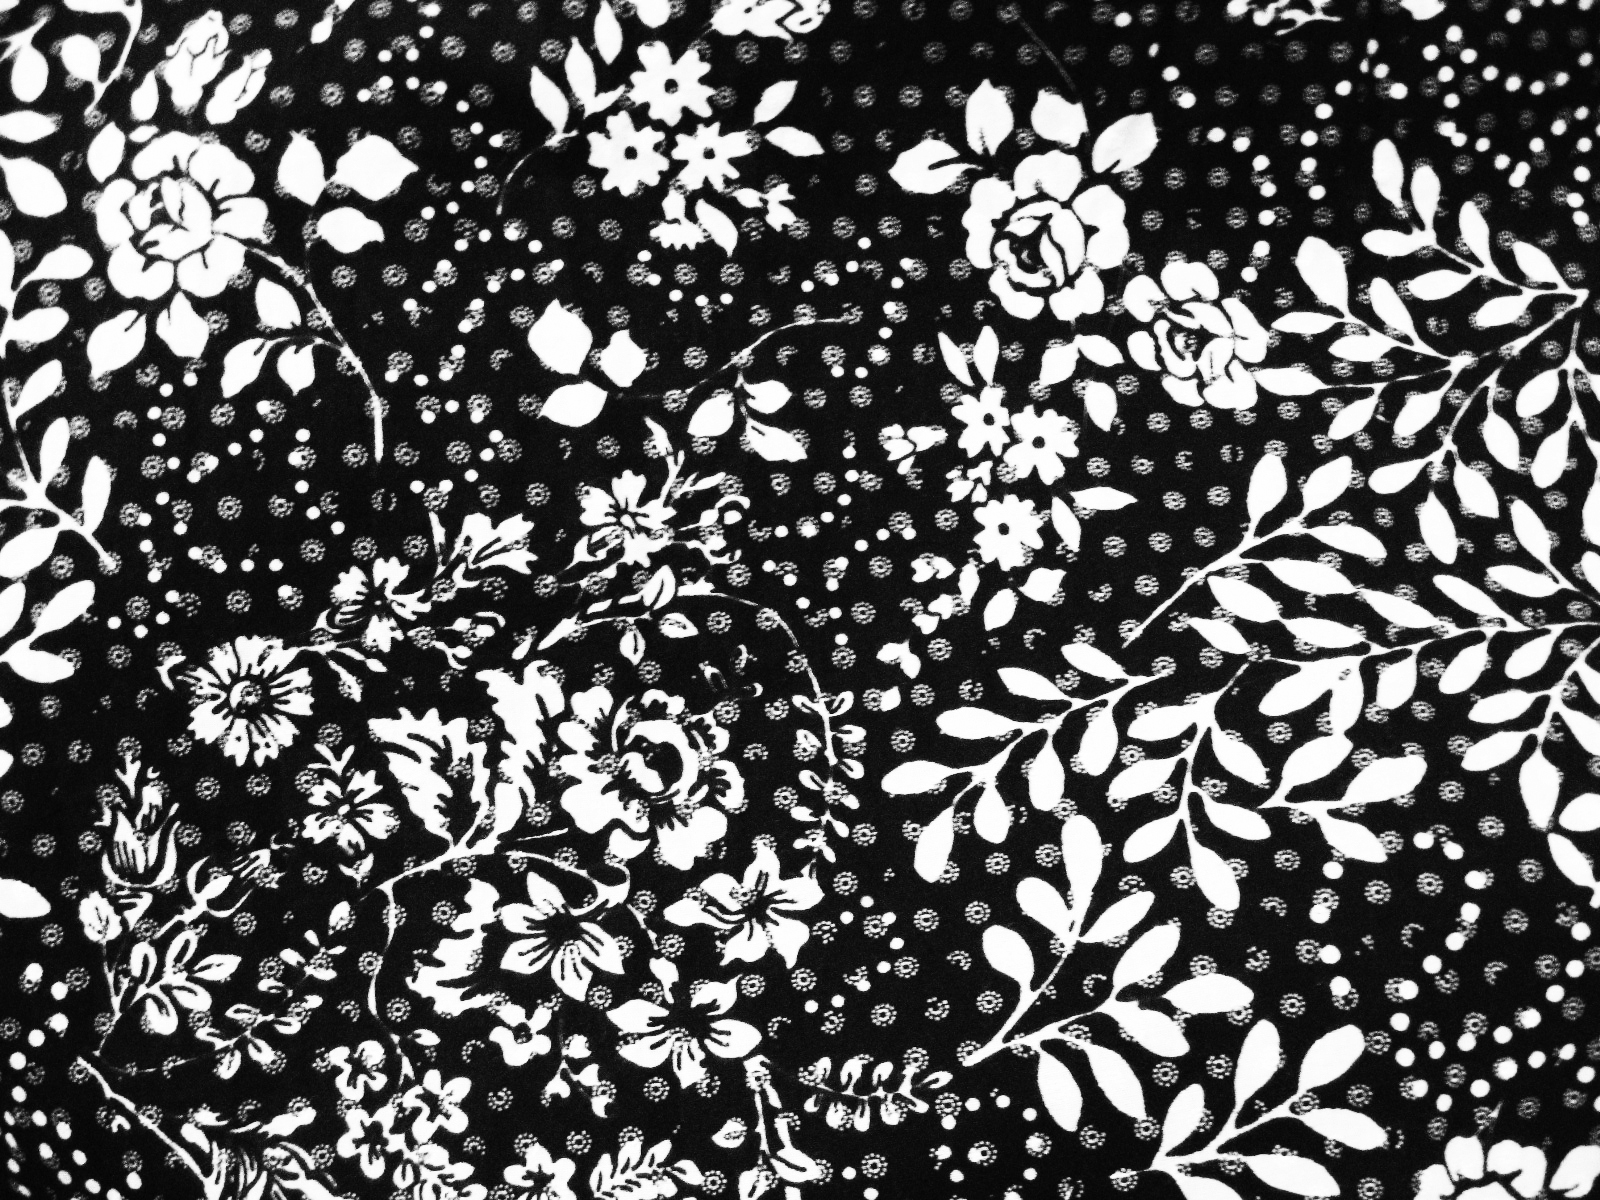 Floral Photoshop Patterns by *redheadstock on deviantART